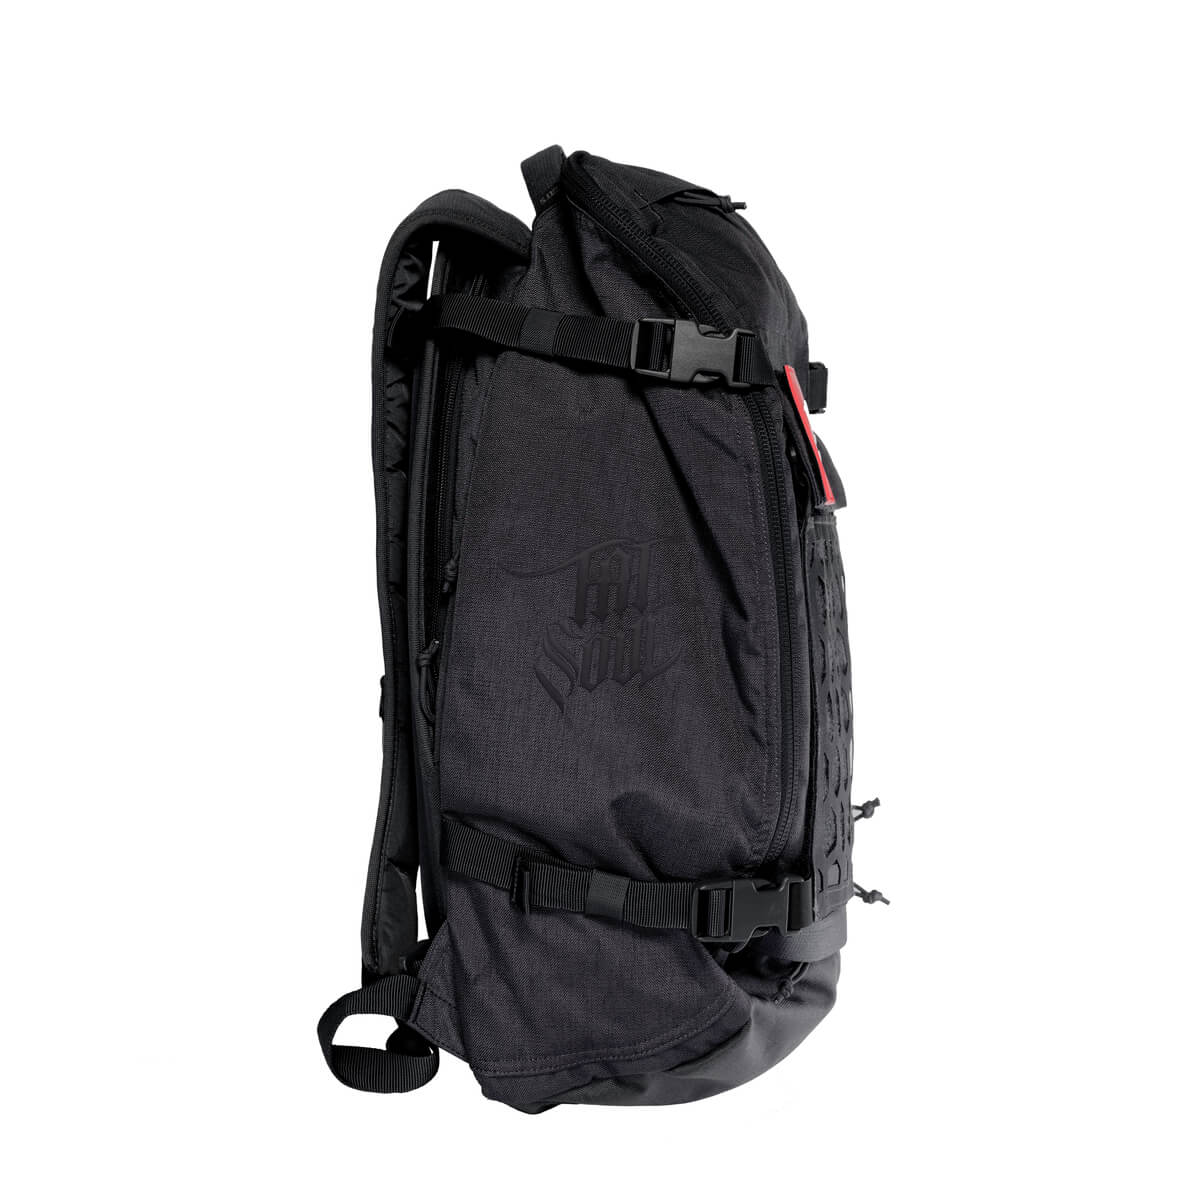 5.11 Tactical x TATSoul Backpack for Tattoo Artists On the Go